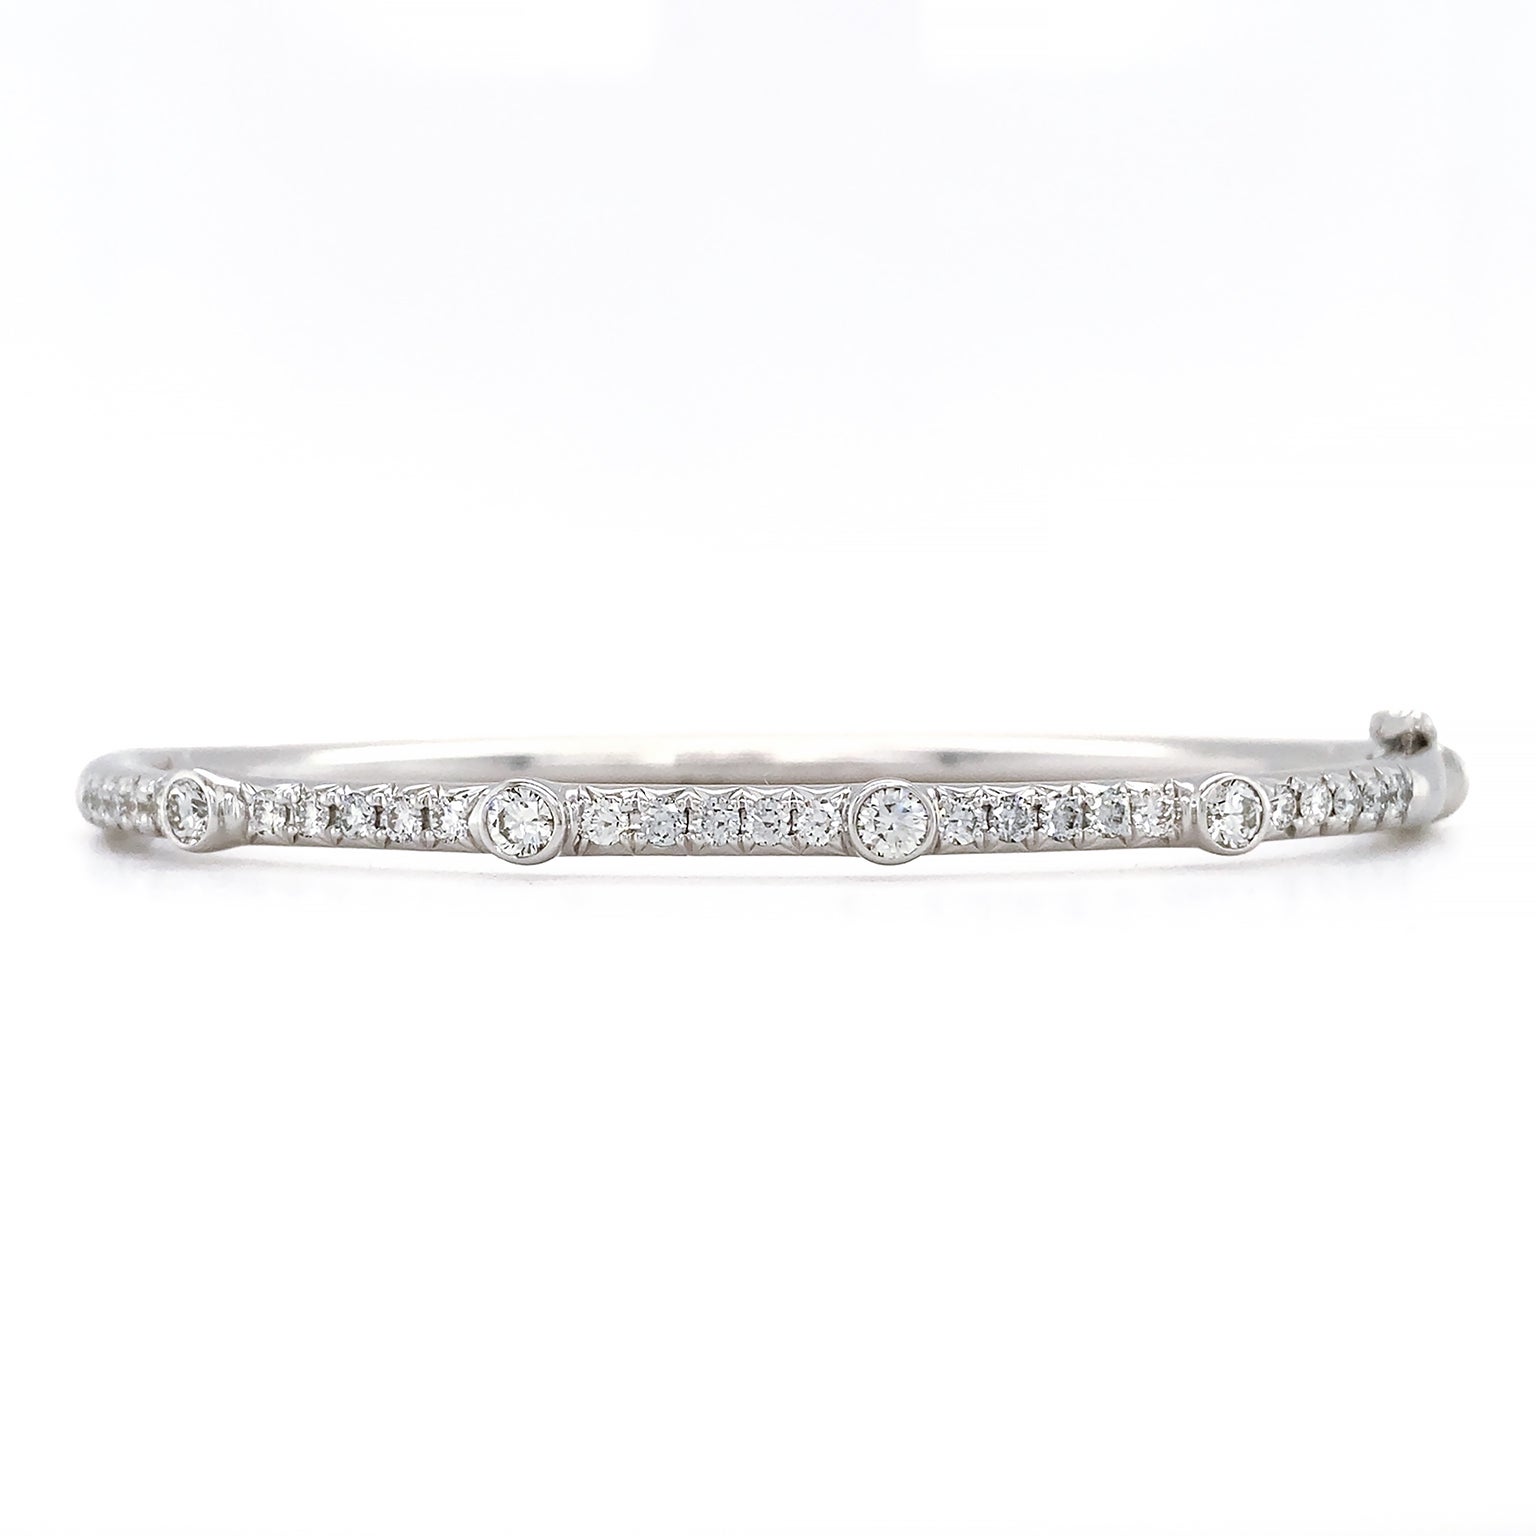 Radiance encompasses this bracelet. A slender 18k white gold bangle is elevated by a row of paved brilliant cut diamonds on the upper part. Four larger bezel set diamonds are dispersed throughout the line. This totals to .99 carats of the gem. A